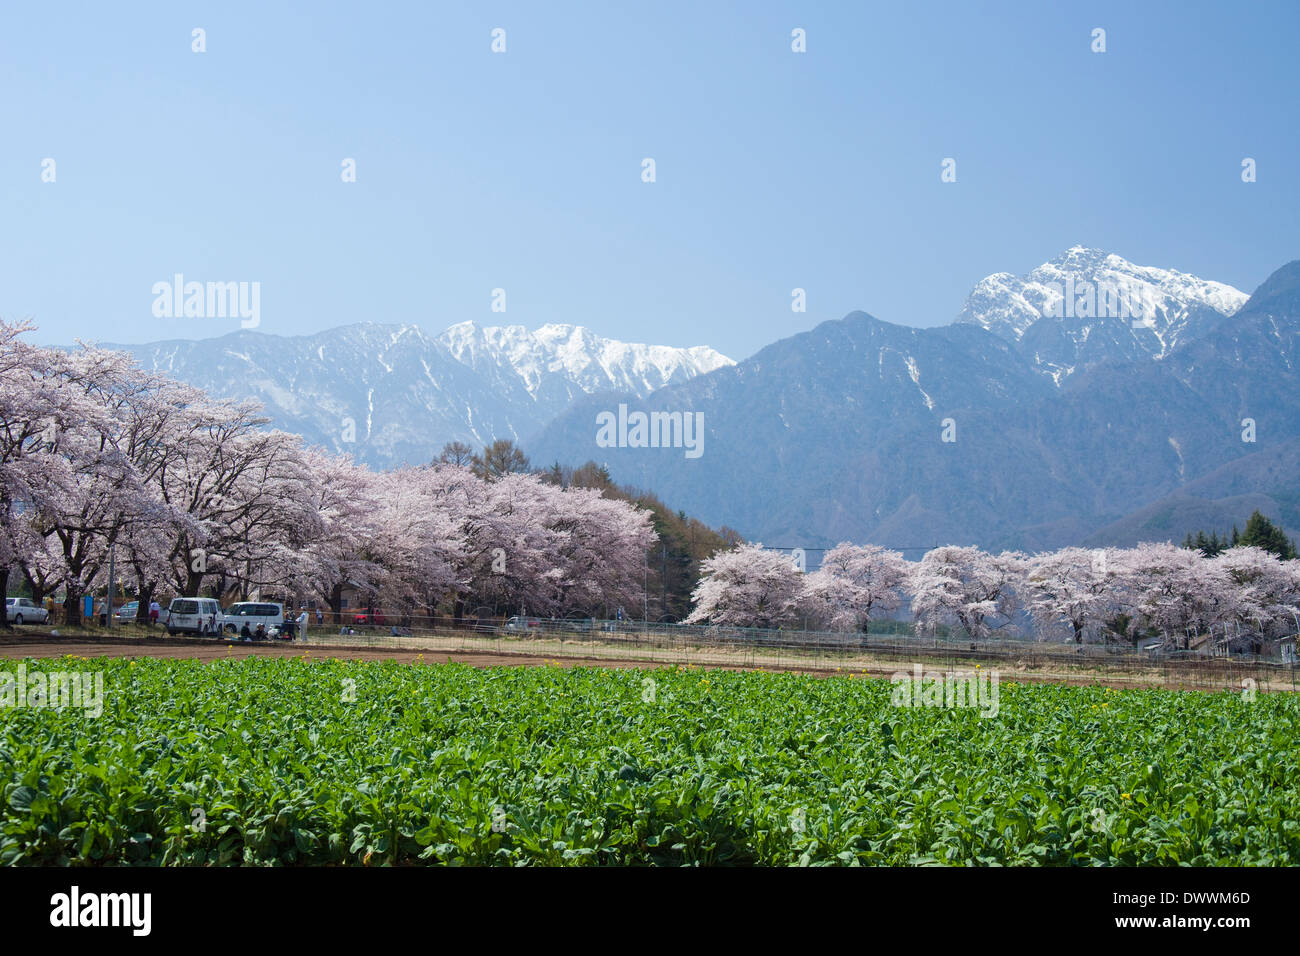 Snowcapped mountains and cherry trees, Yamanashi Prefecture, Japan Stock Photo